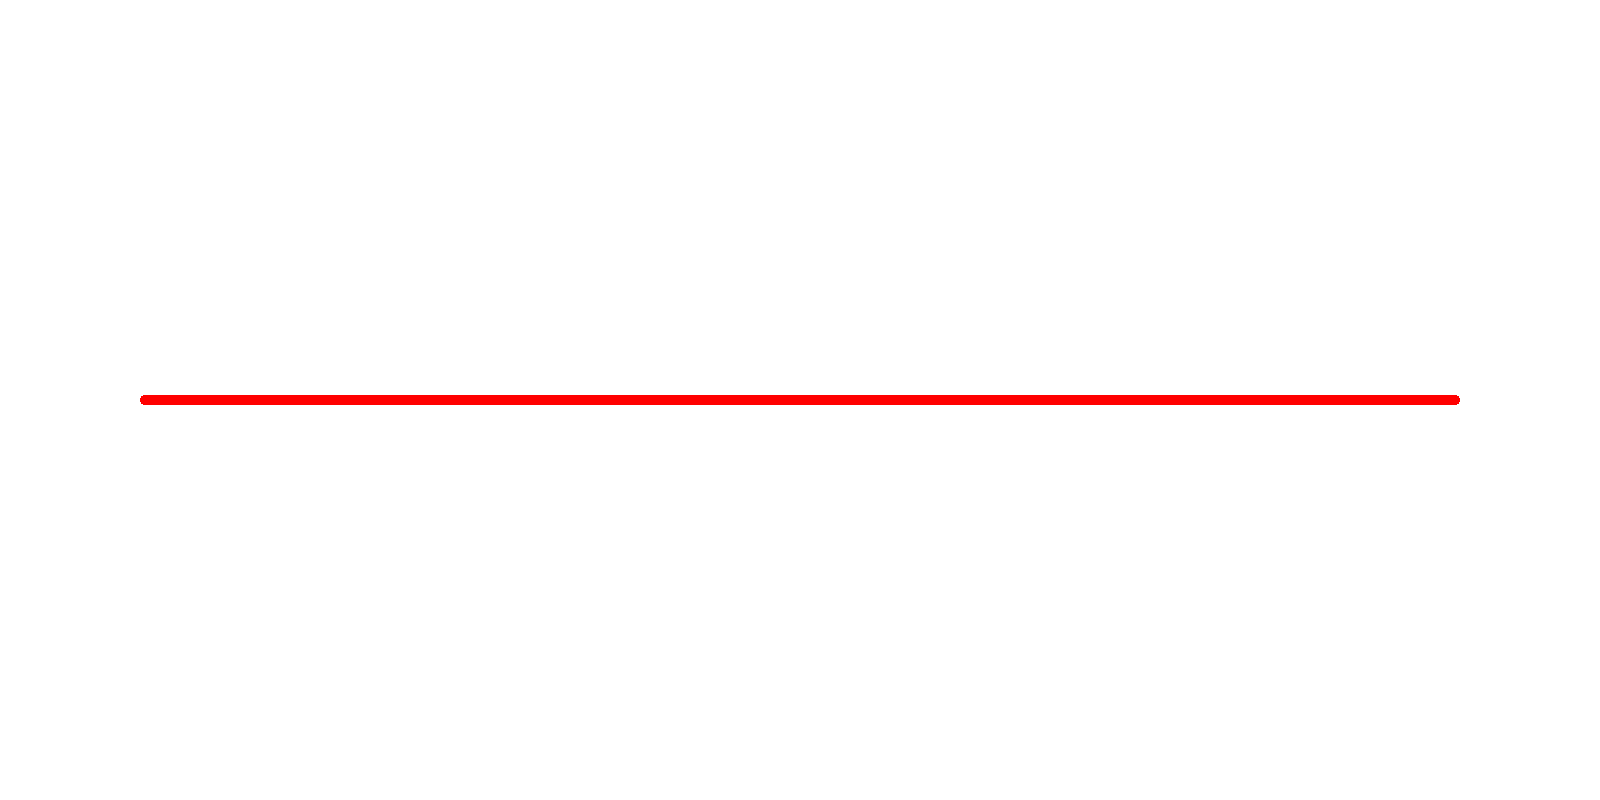 Boosted Auto Collection LLC